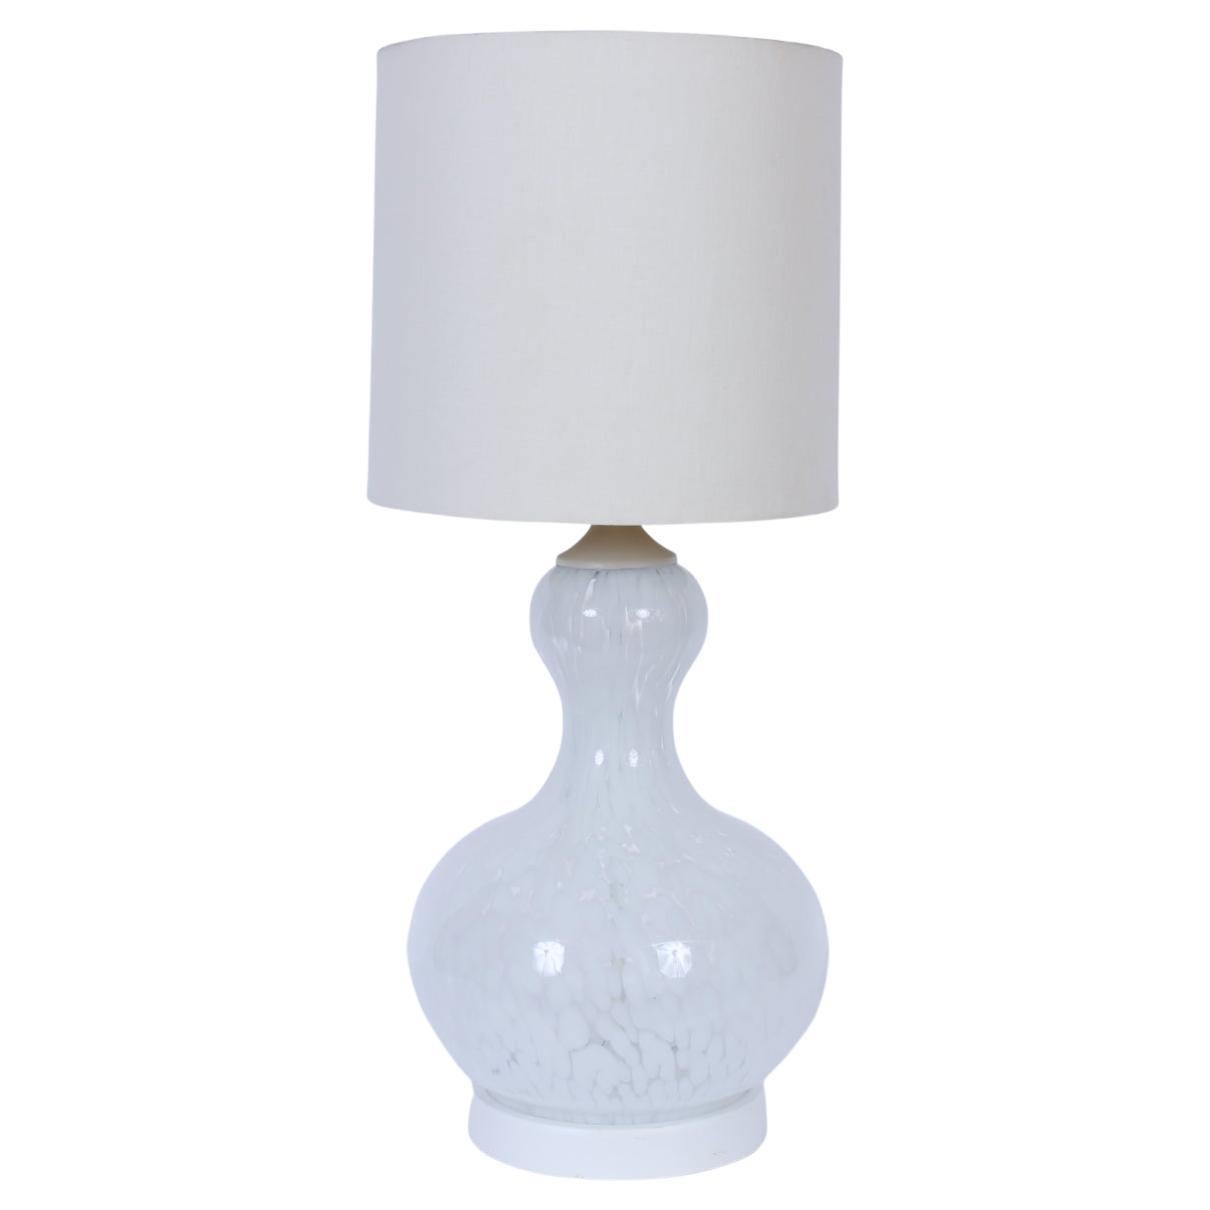 Large Carlo Nason Mazzega attributed handblown Mottled Murano table lamp. Featuring a large, handcrafted Murano Glass gourd form with luminescent white on white translucent design on white circular base. 26 H top of socket. 21 H top of glass. Shade